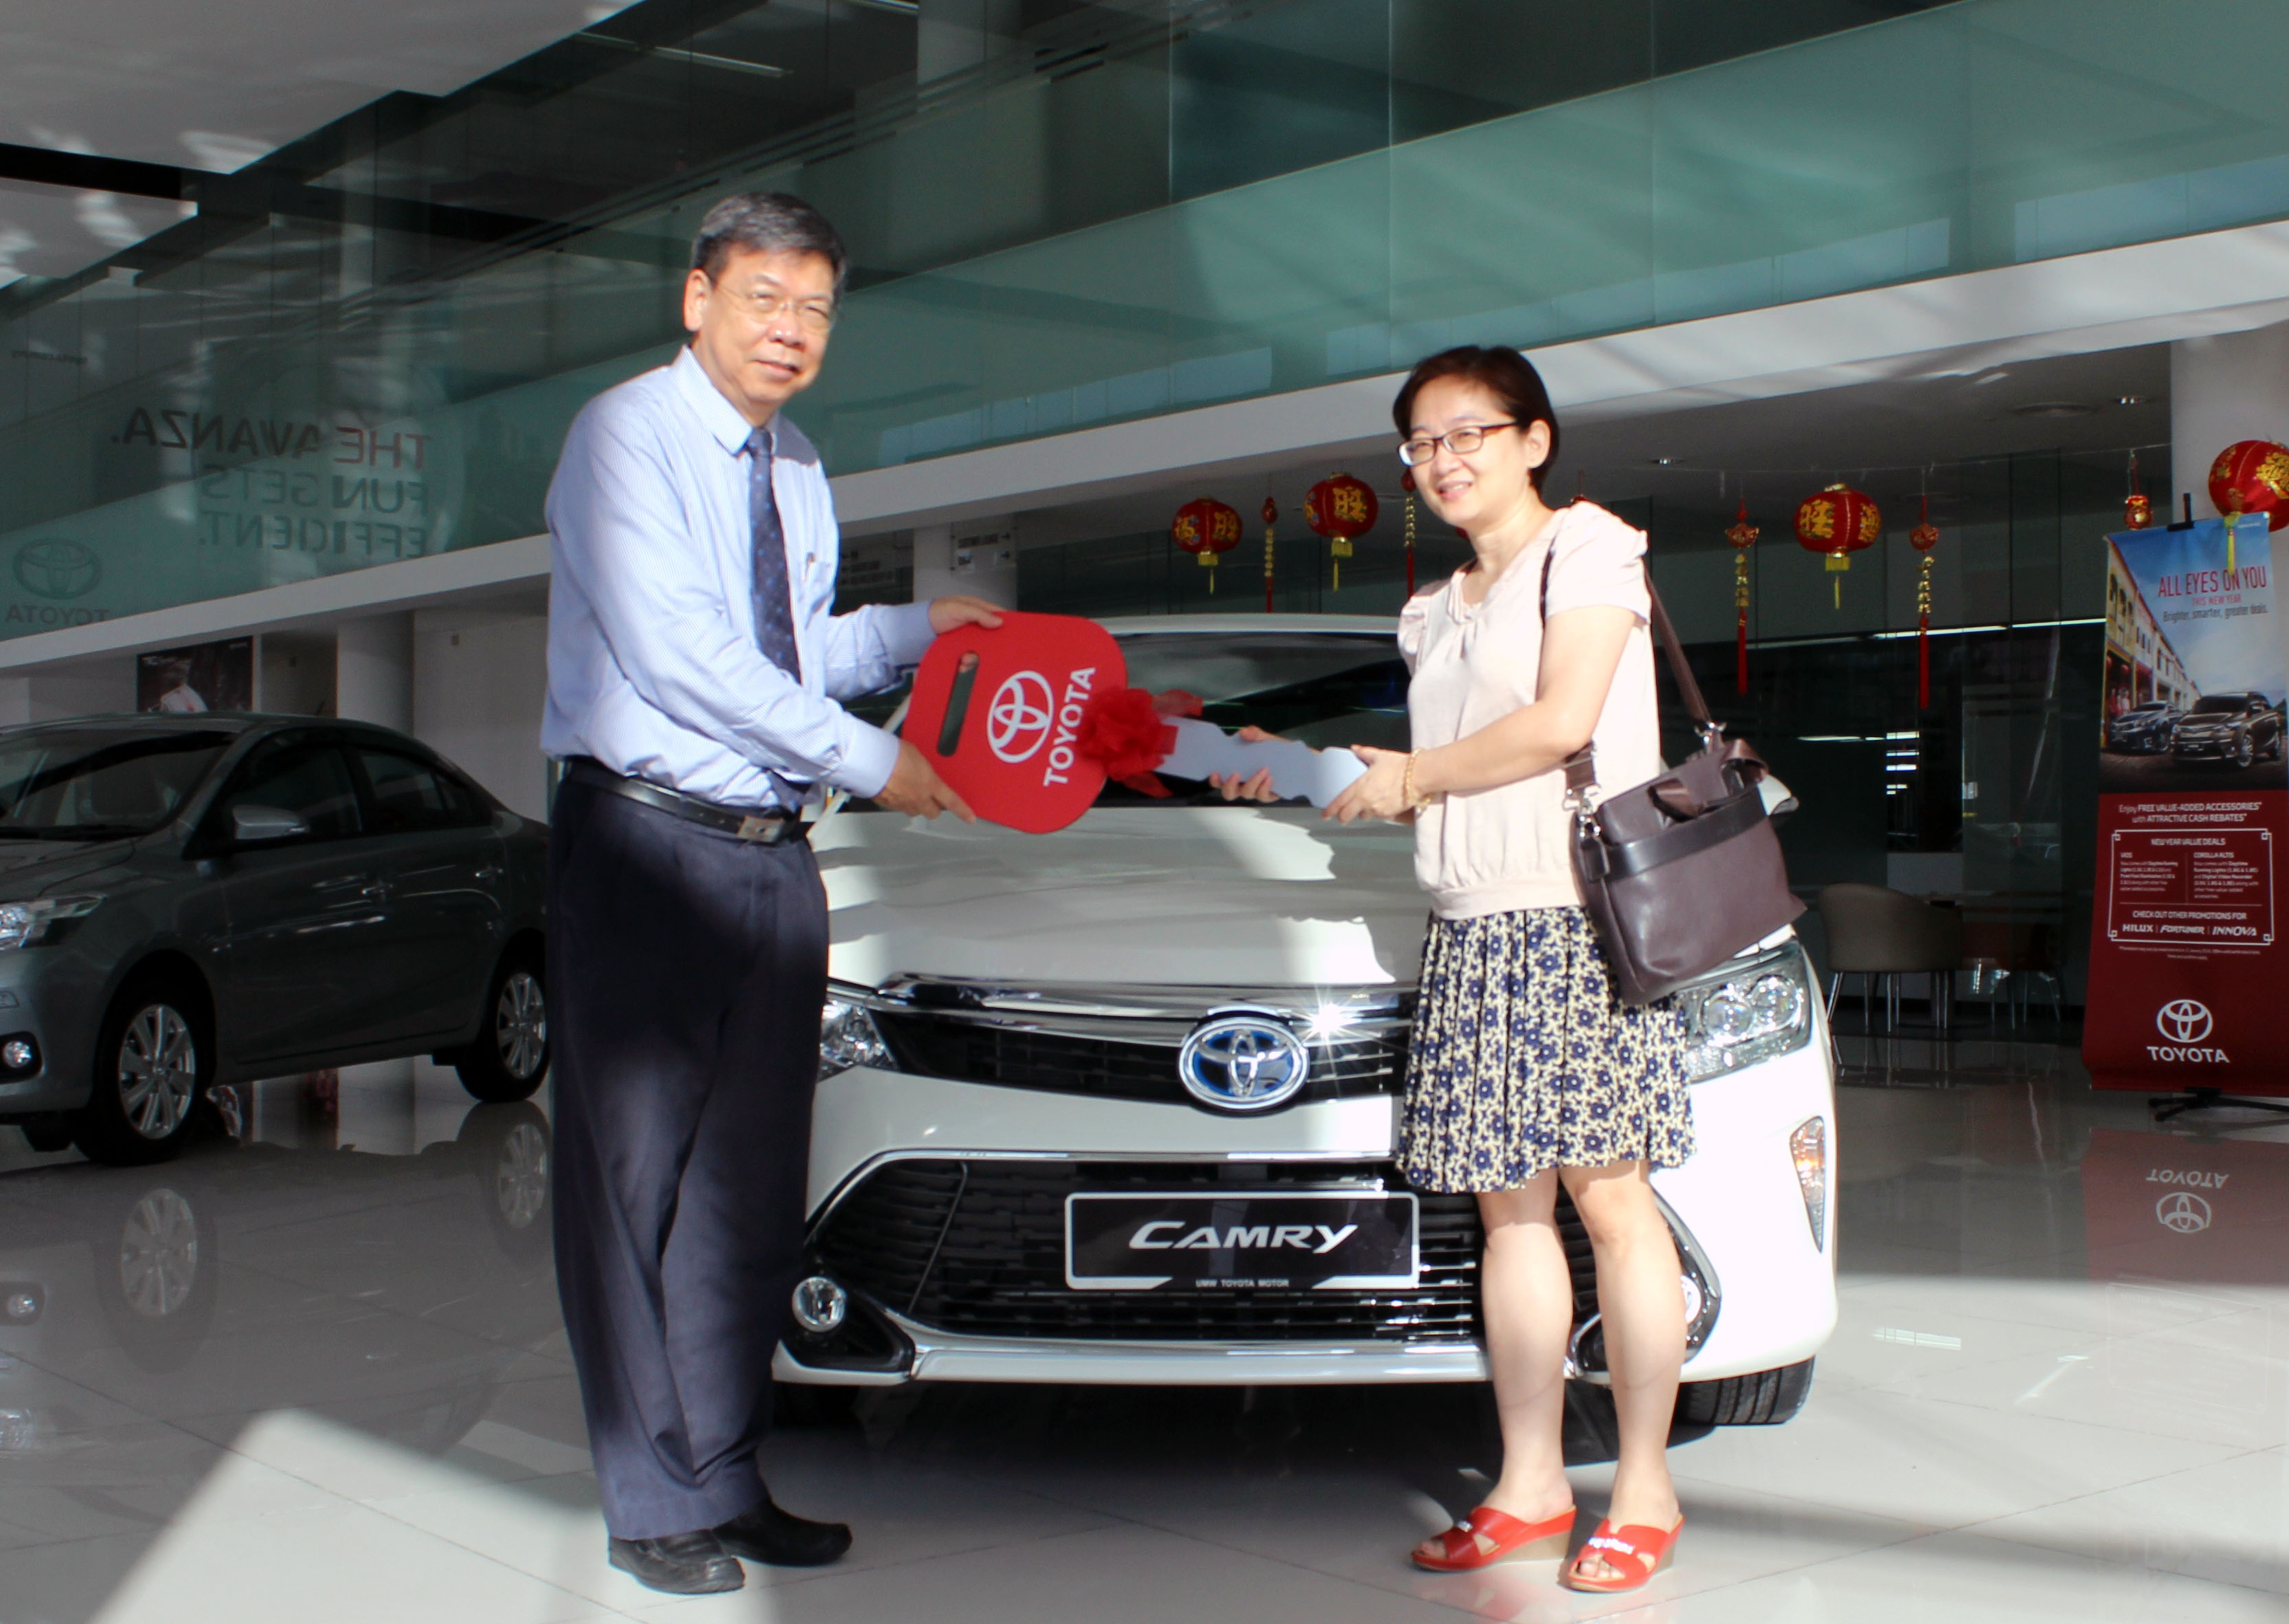 Ms. Khoo Bee Ngoh (right) received the new Toyota Camry Hybrid from Mr. Khong Man Chong, Executive Director of Sales Group, UMW Toyota Motor